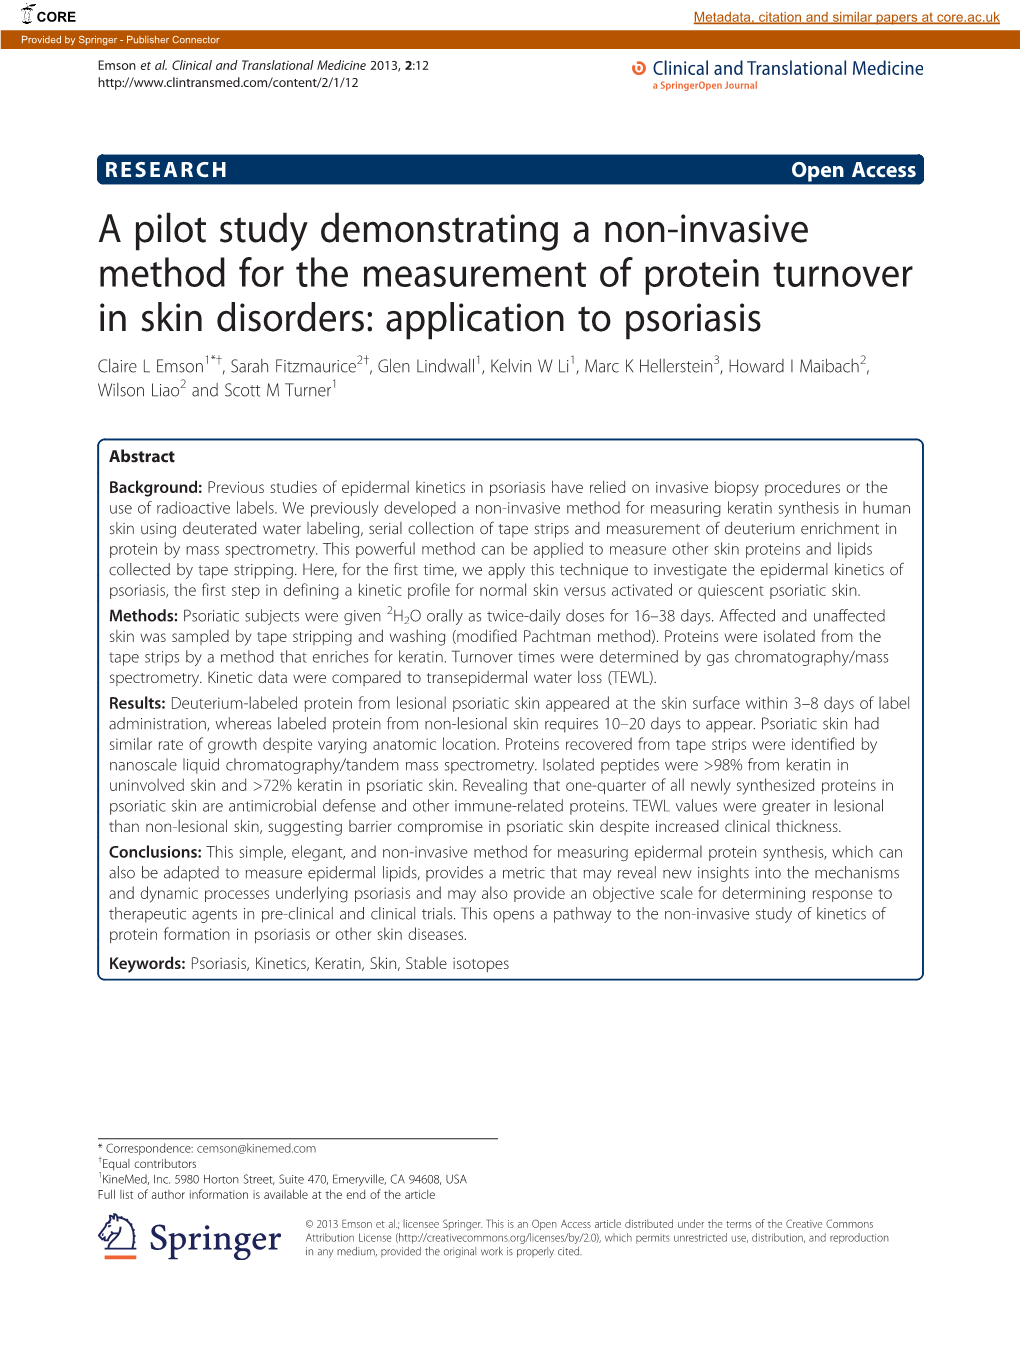 A Pilot Study Demonstrating a Non-Invasive Method For